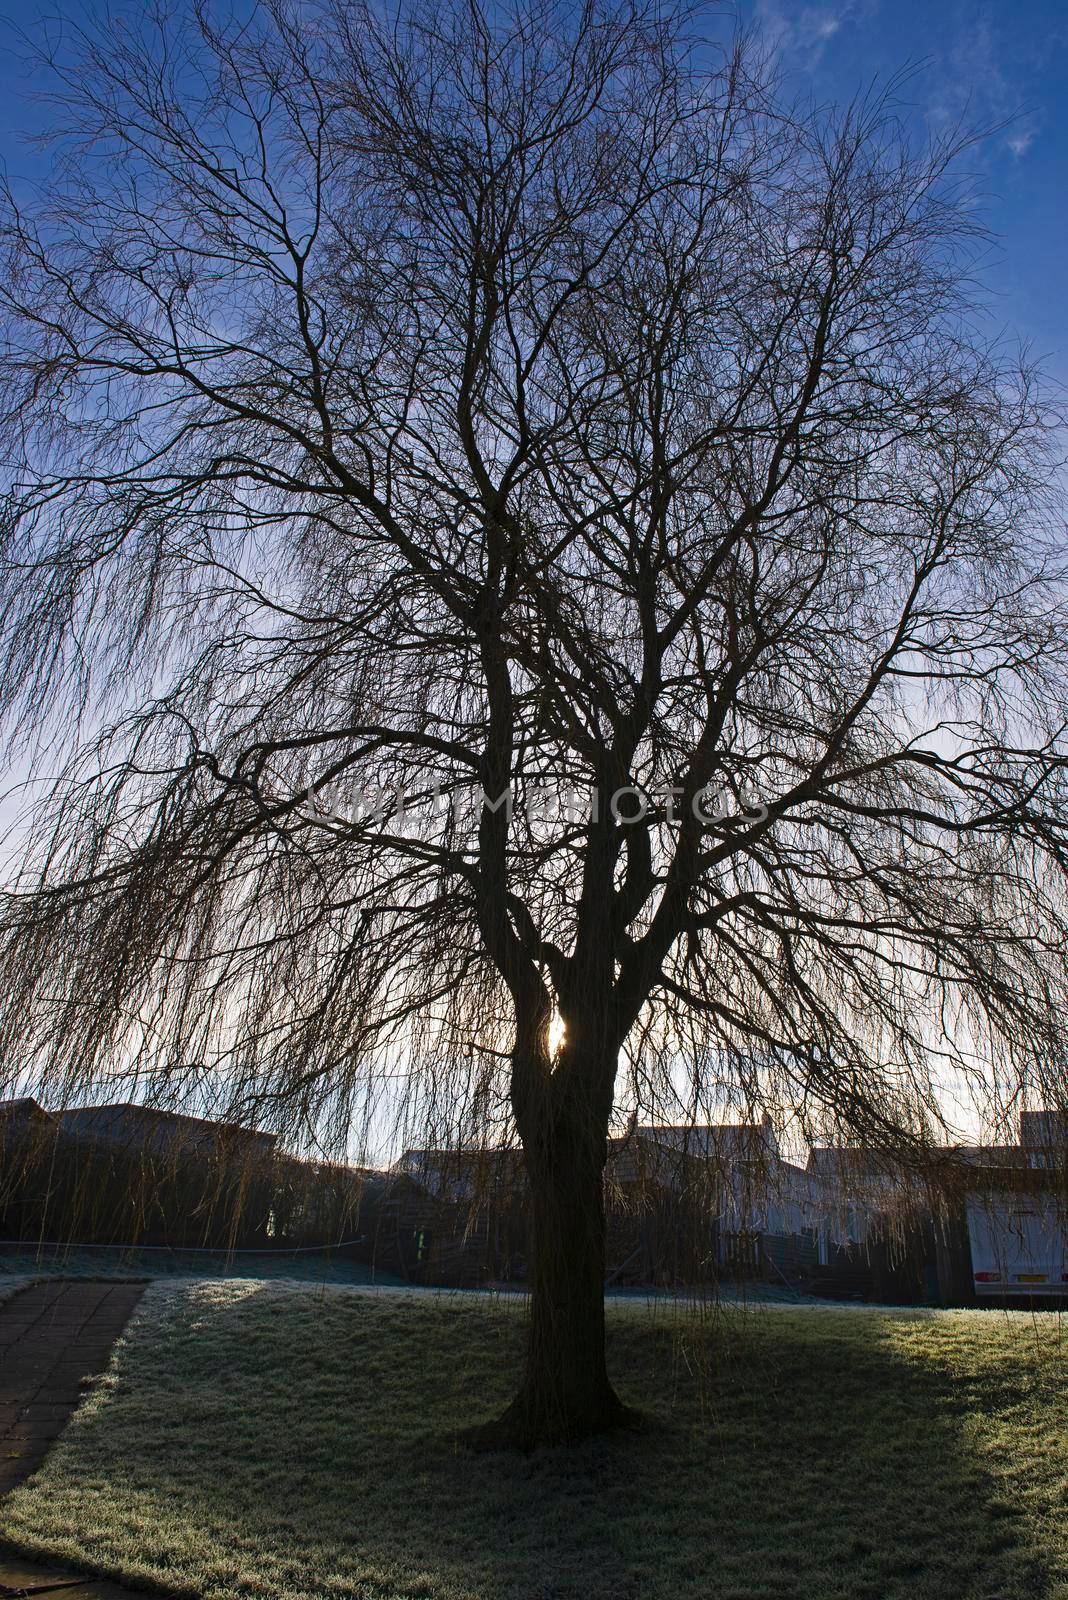 Bare weeping willow tree salix babylonica silhouette in winter rural garden countryside landscape against blue sky background